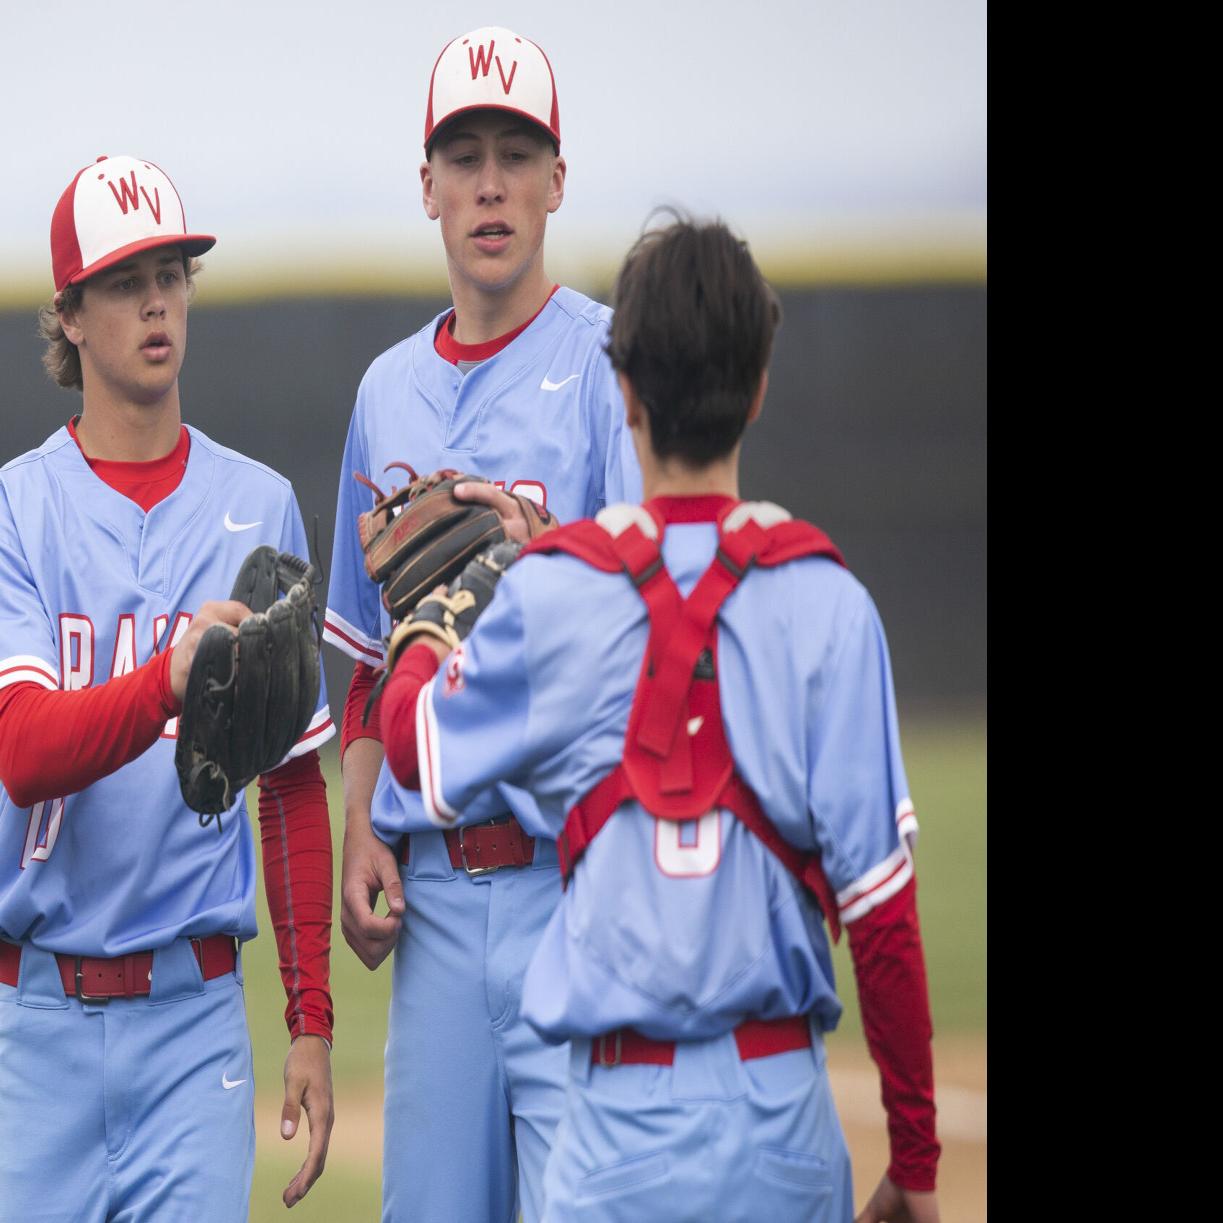 Cougars baseball hoping for redemption against Huskies, Sports news, Lewiston Tribune